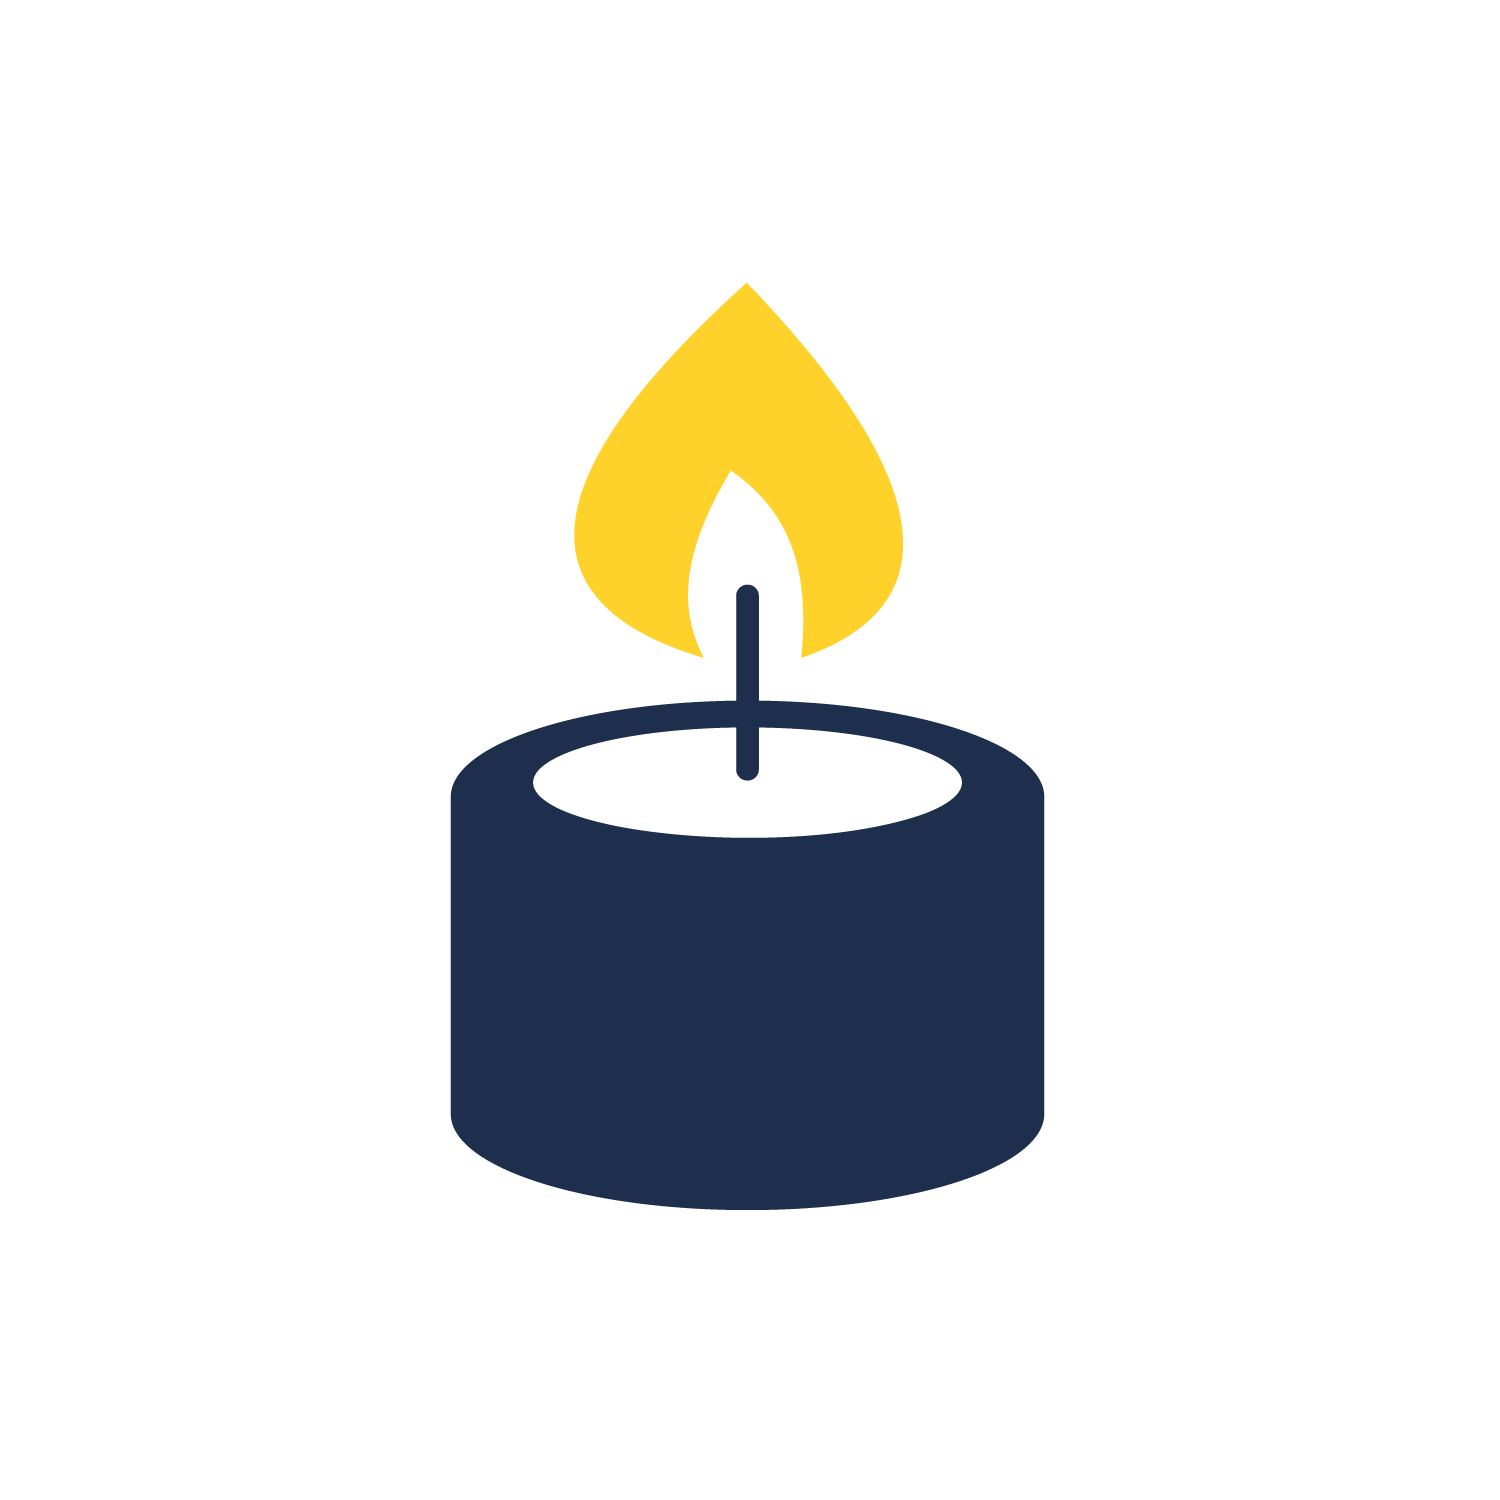 A candle icon on a white background.